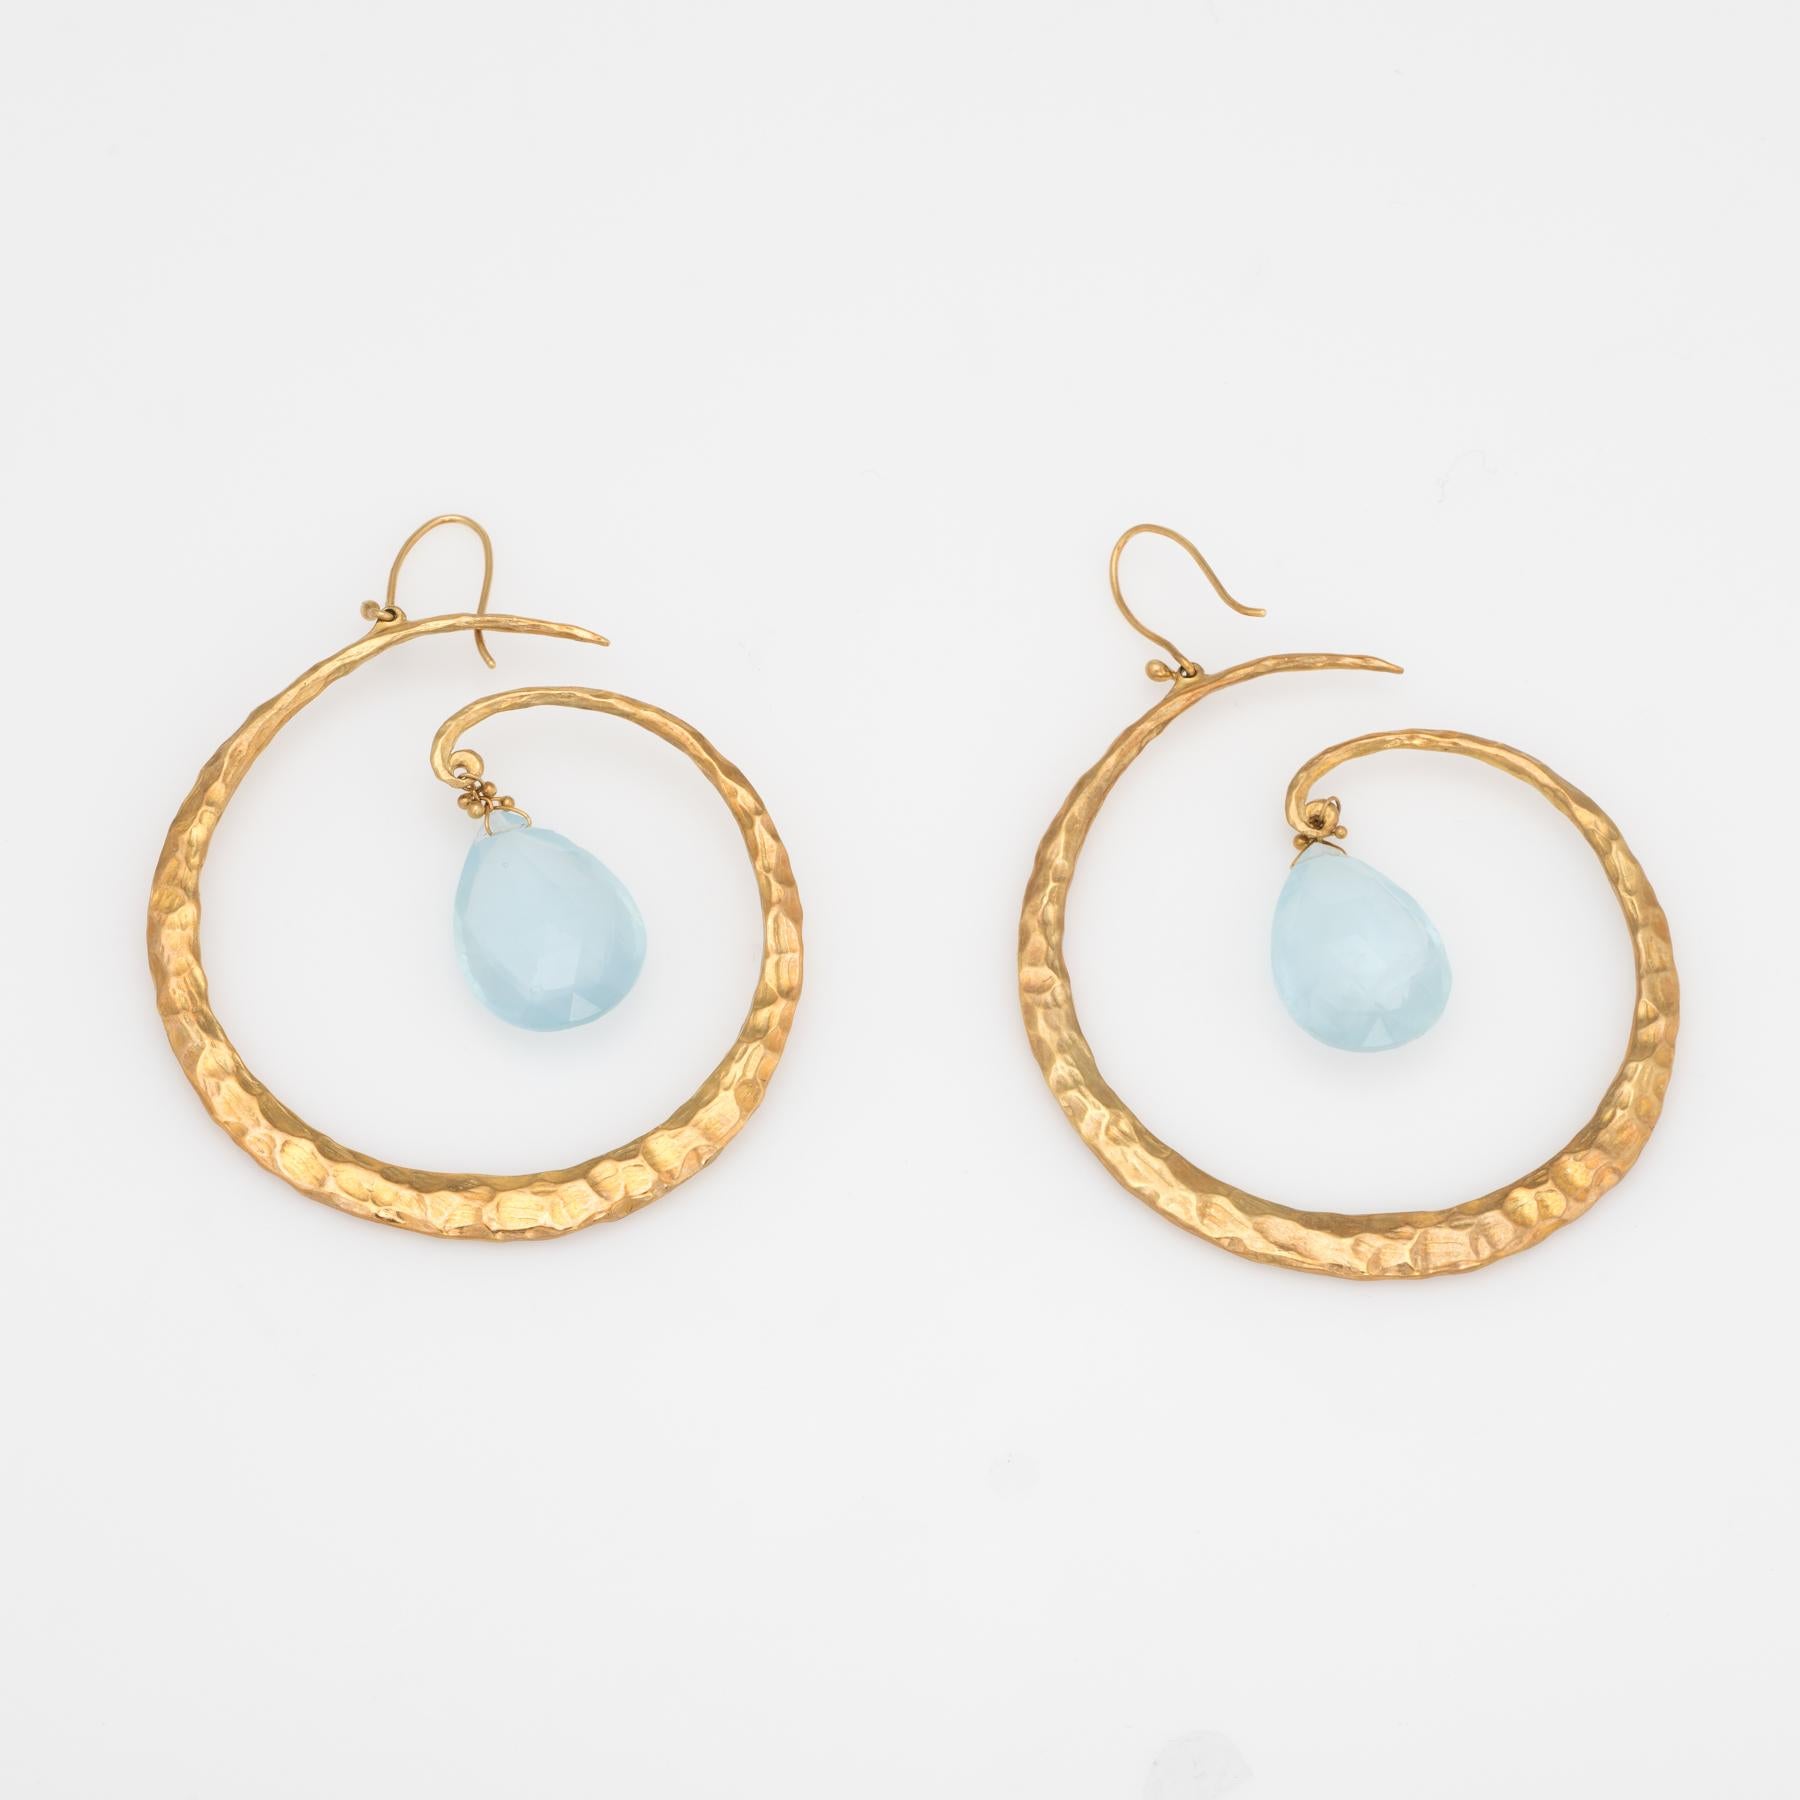 Elegant pair of estate aquamarine large hoop earrings, crafted in 18k yellow gold. 

Briolette faceted aquamarine each measures 16mm x 12mm (estimated at 6.50 carats each - 13 carats total estimated weight). The aquamarines are in excellent